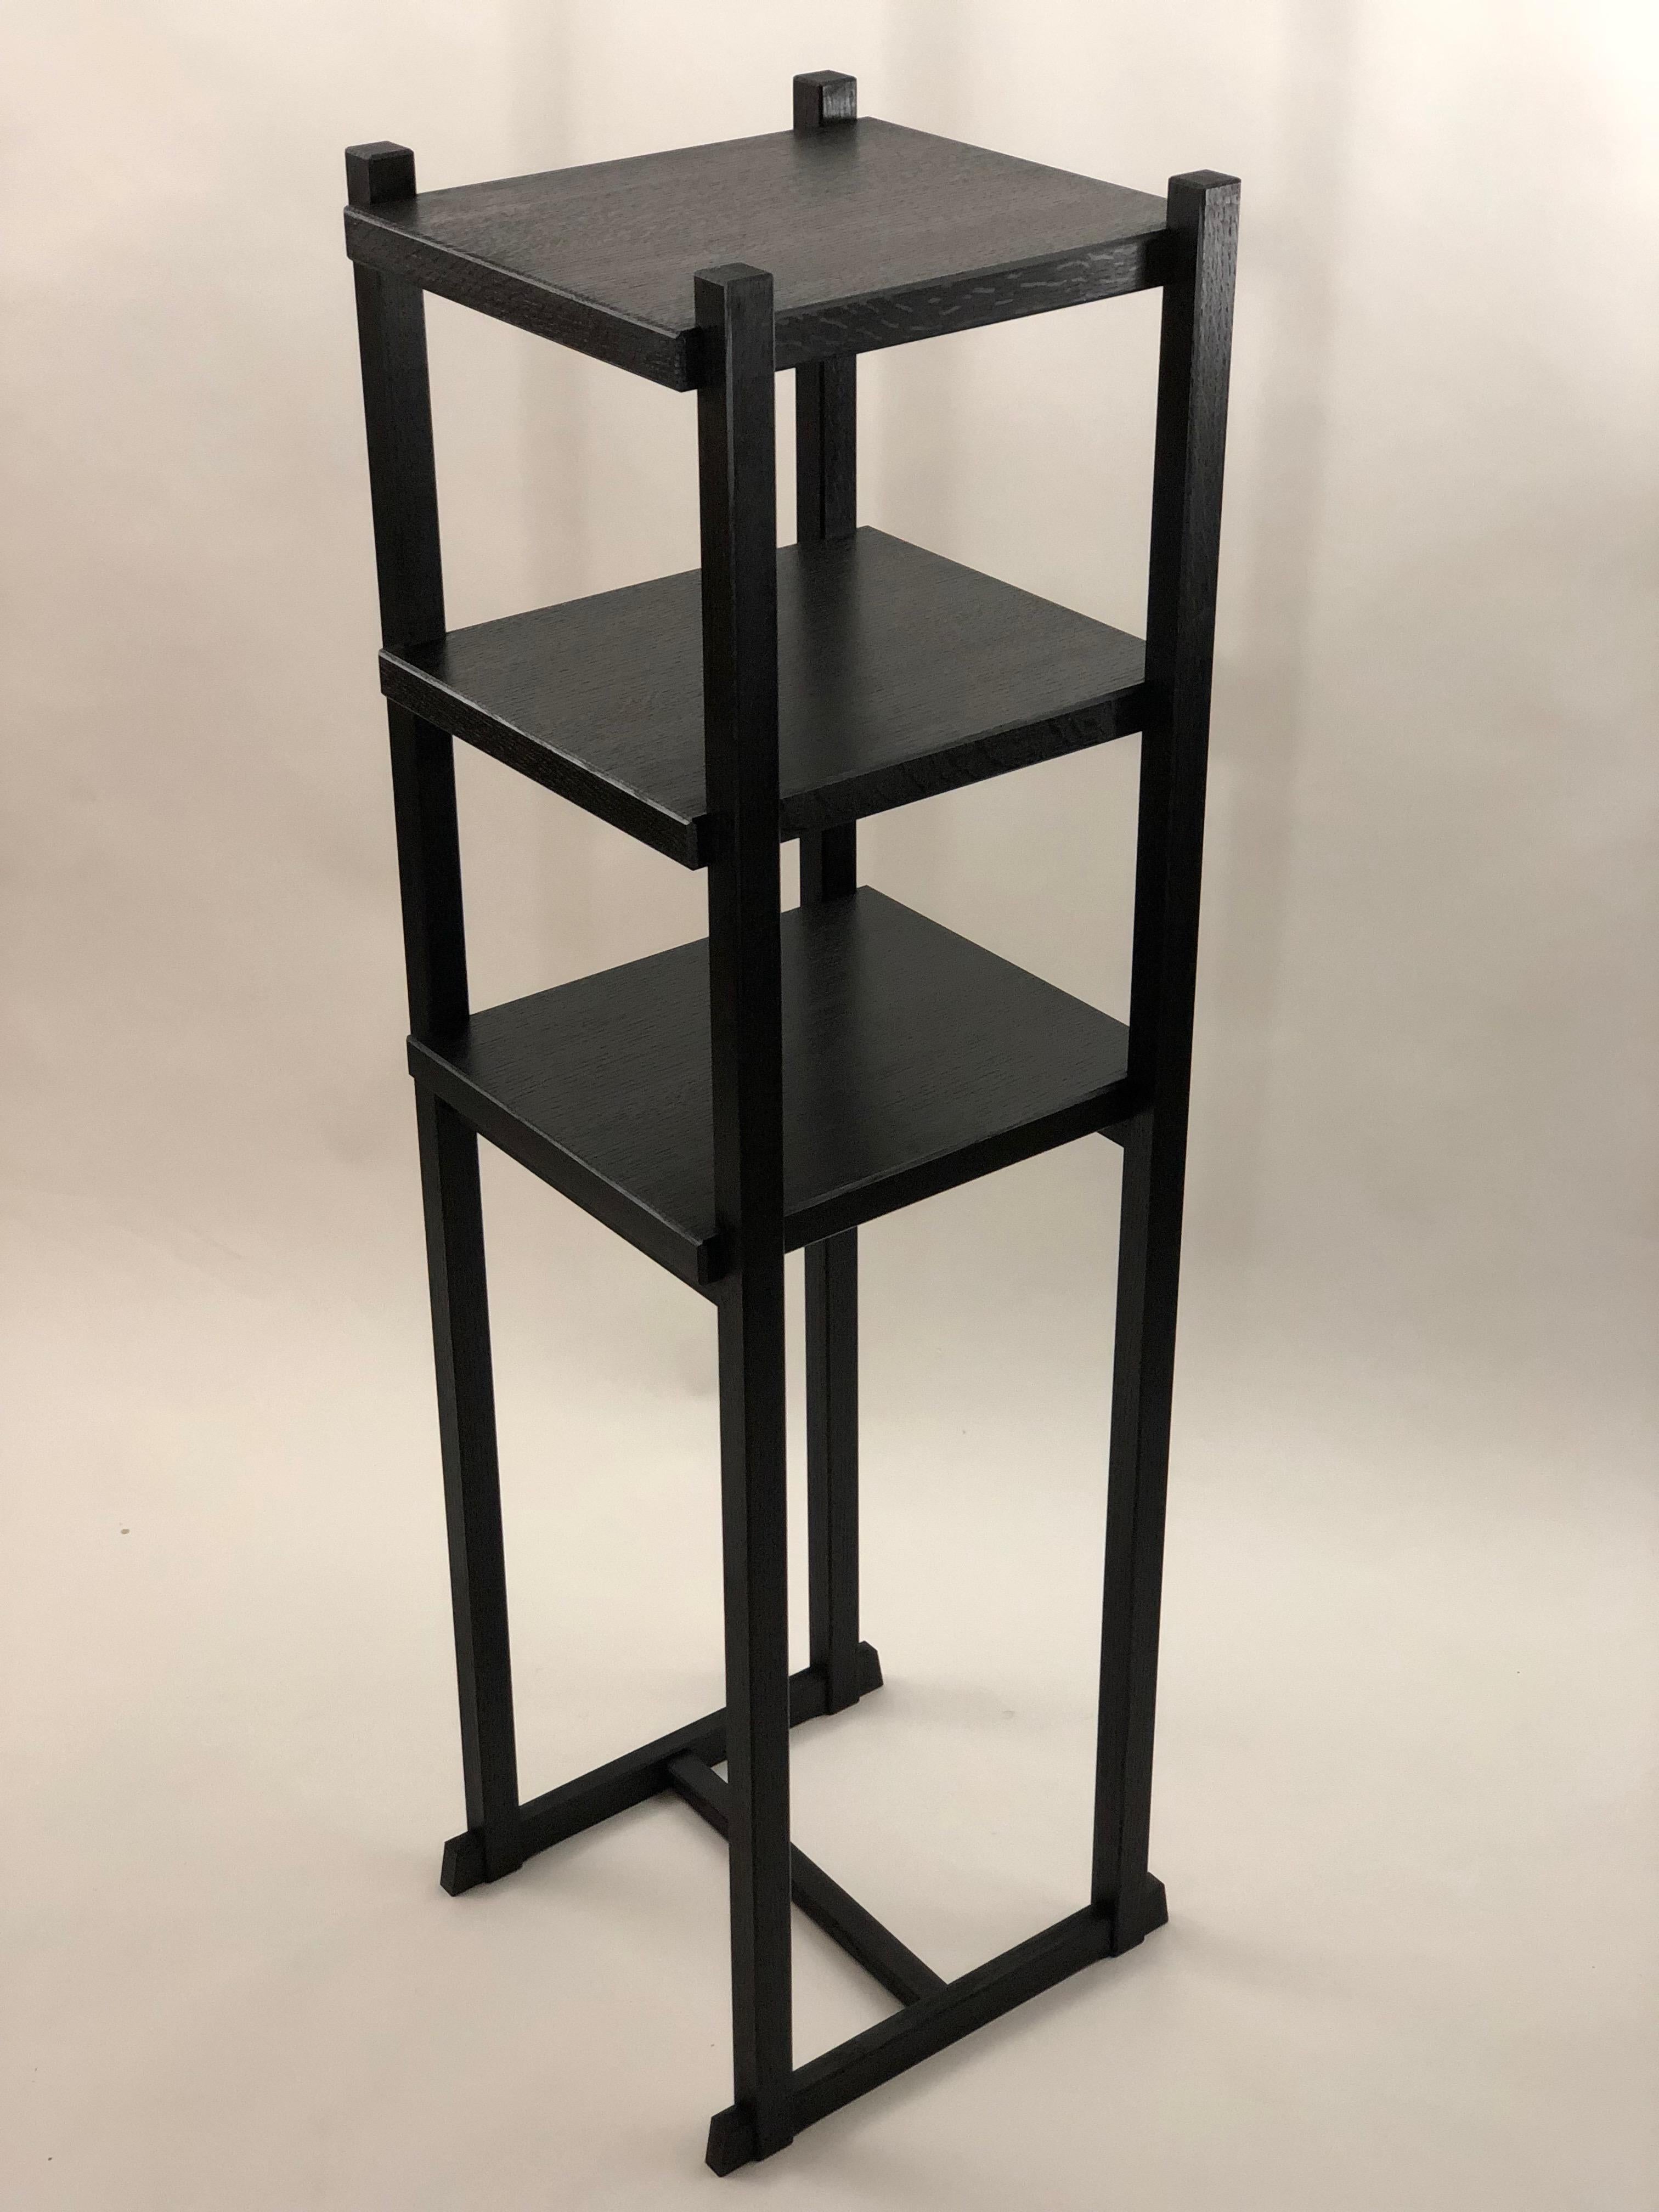 These standing shelves are created utilizing traditional interlocking joinery to form a lightweight, strong and durable structure. Offsets are planned into each joint to allow for careful chamfering of every part, making for a soft hand that